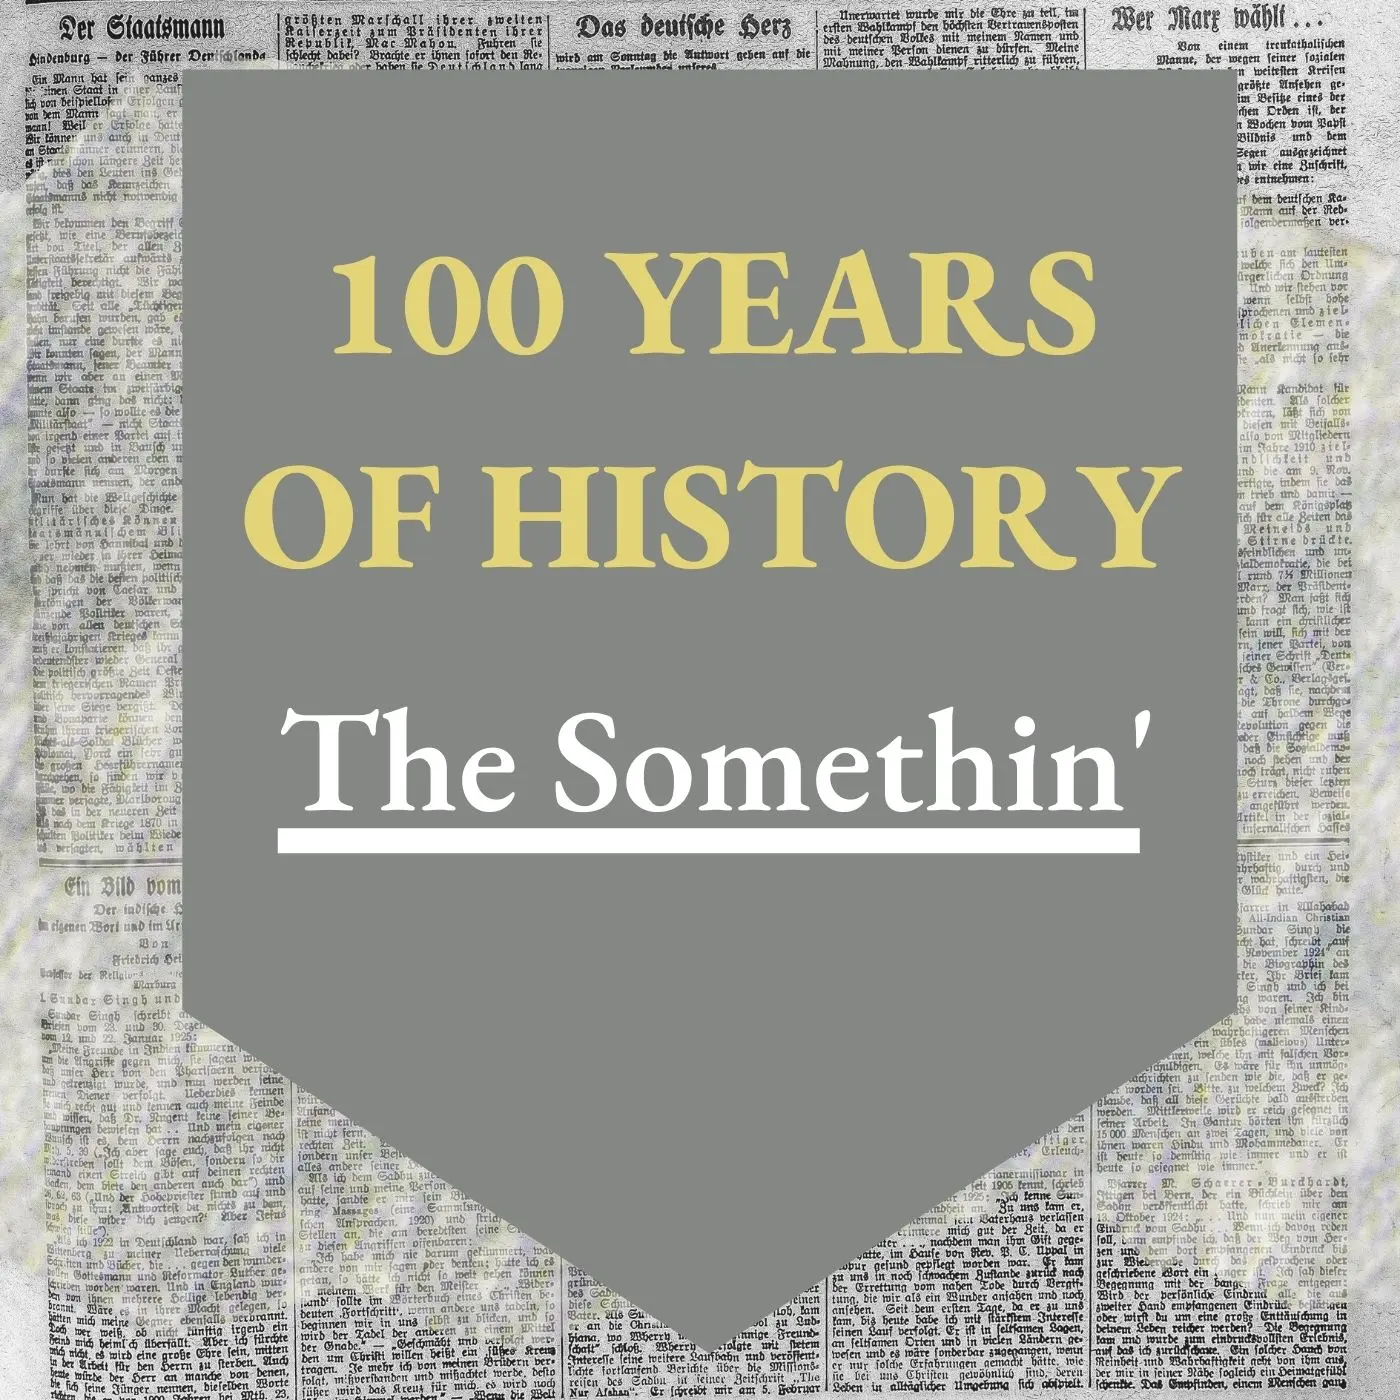 100 years of history: The Somethin’ celebrates 50 years in 1972